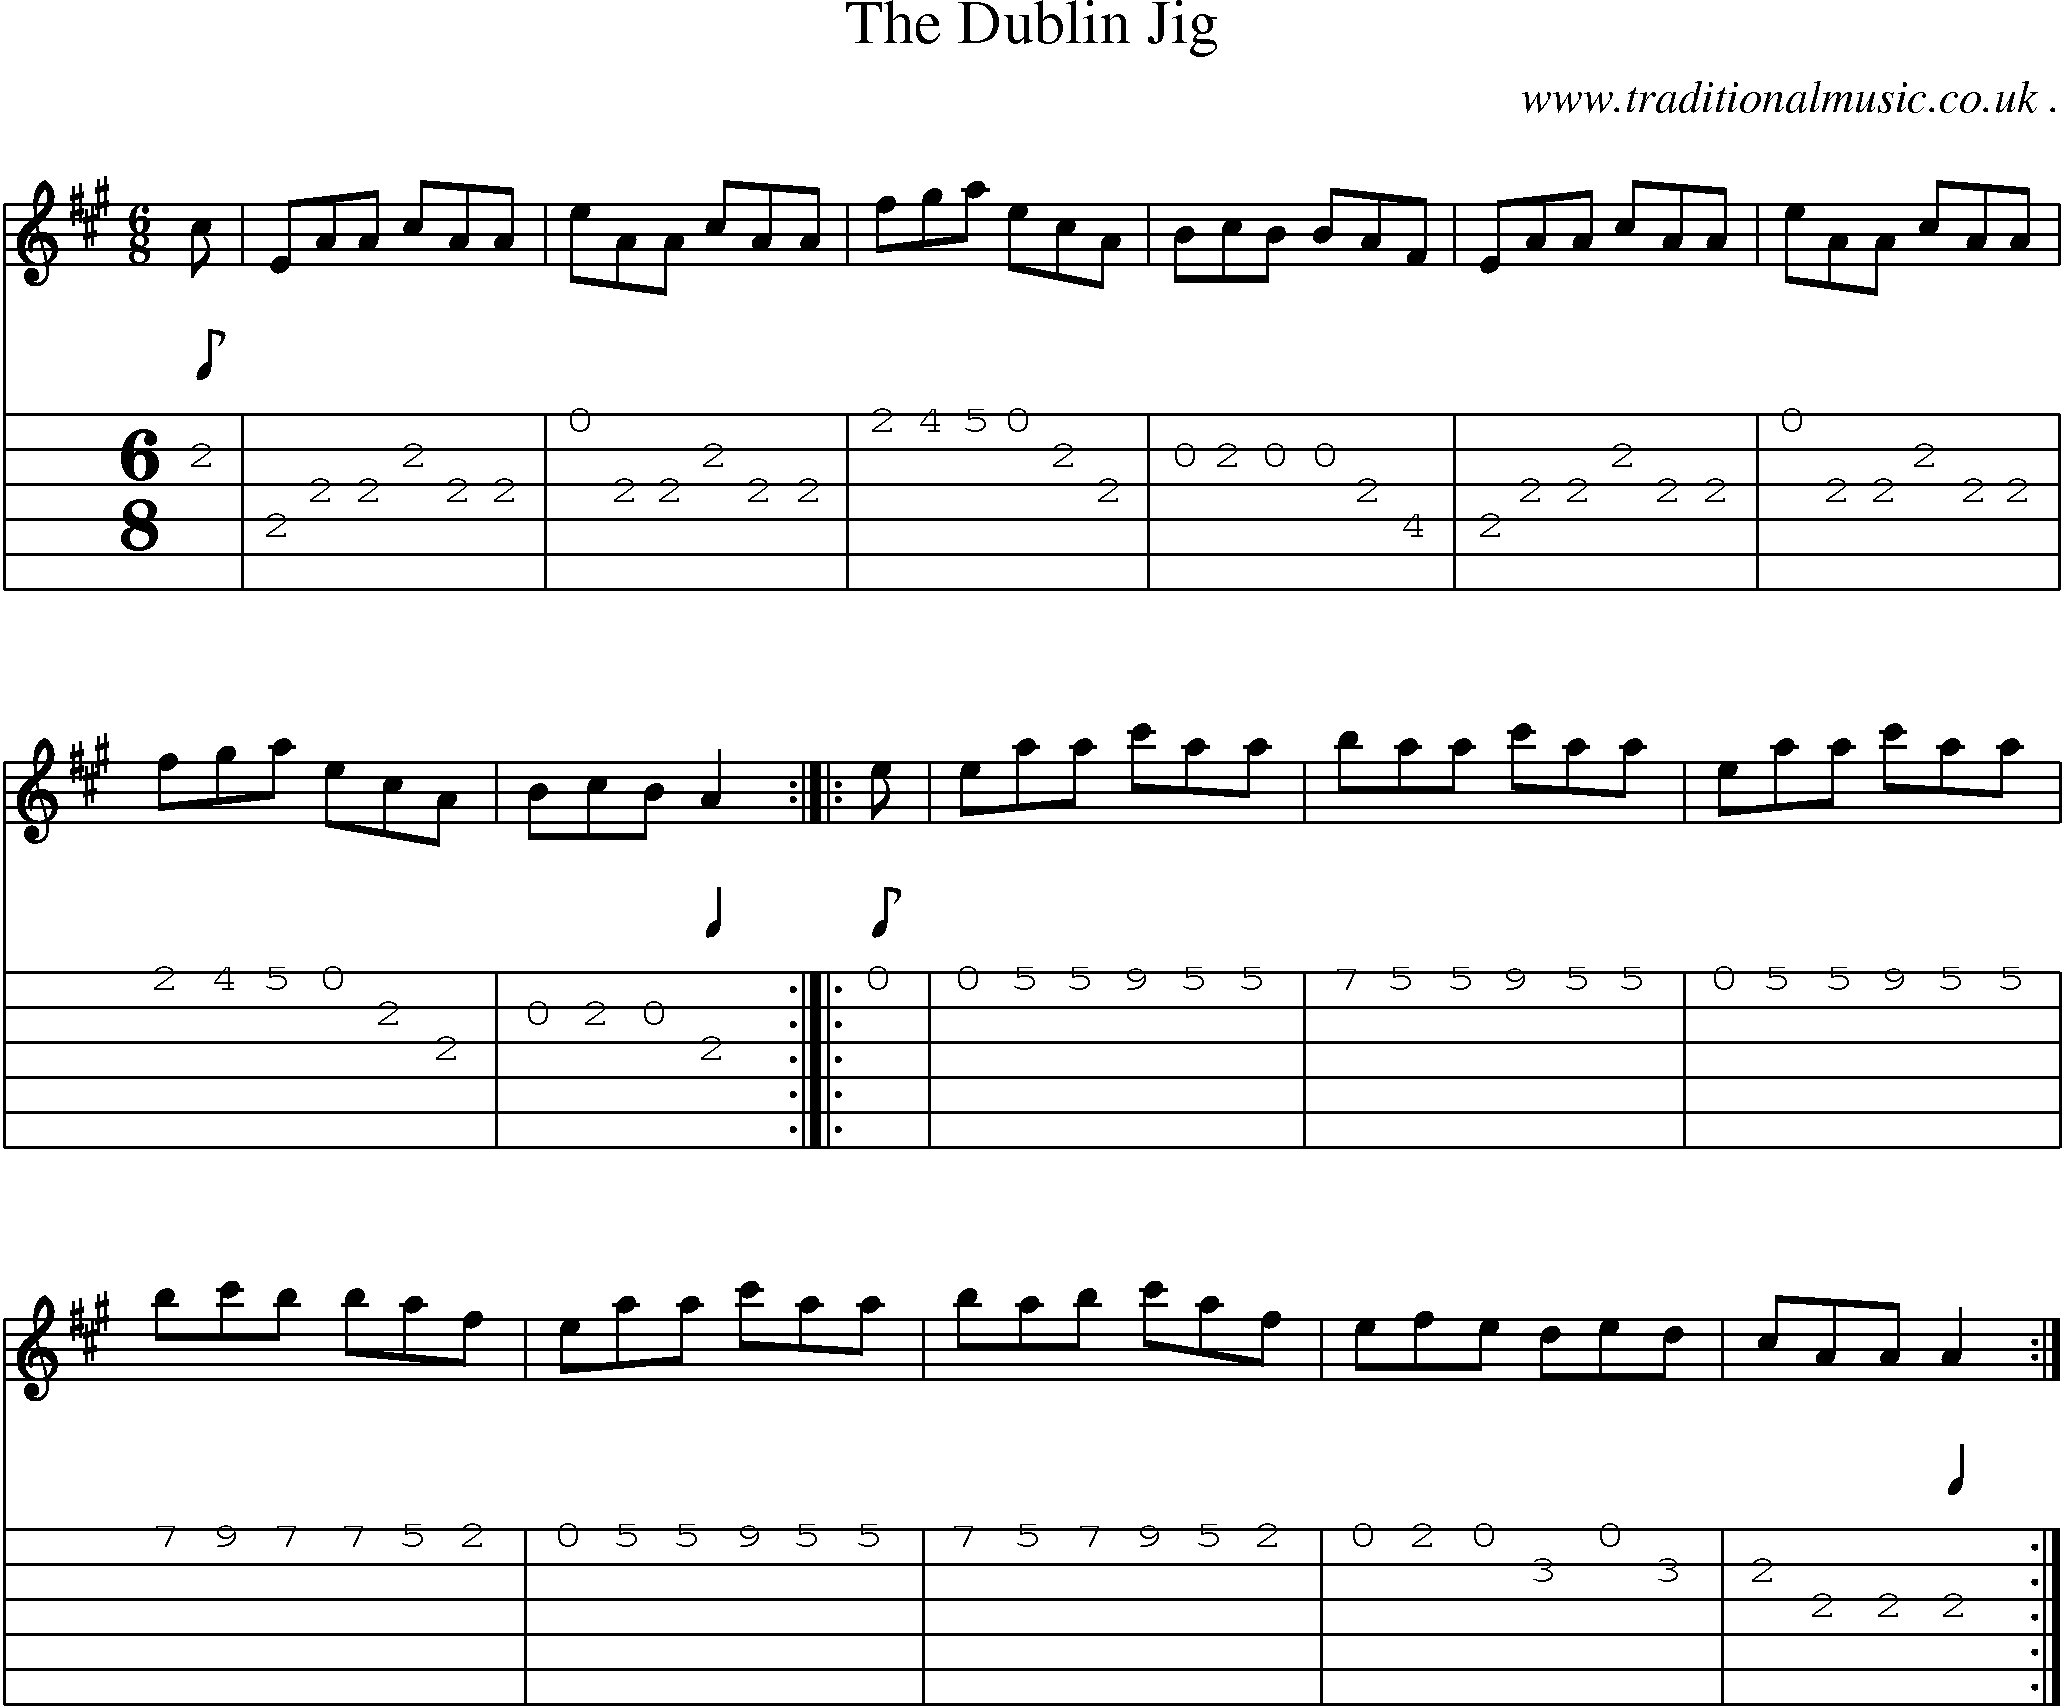 Sheet-music  score, Chords and Guitar Tabs for The Dublin Jig